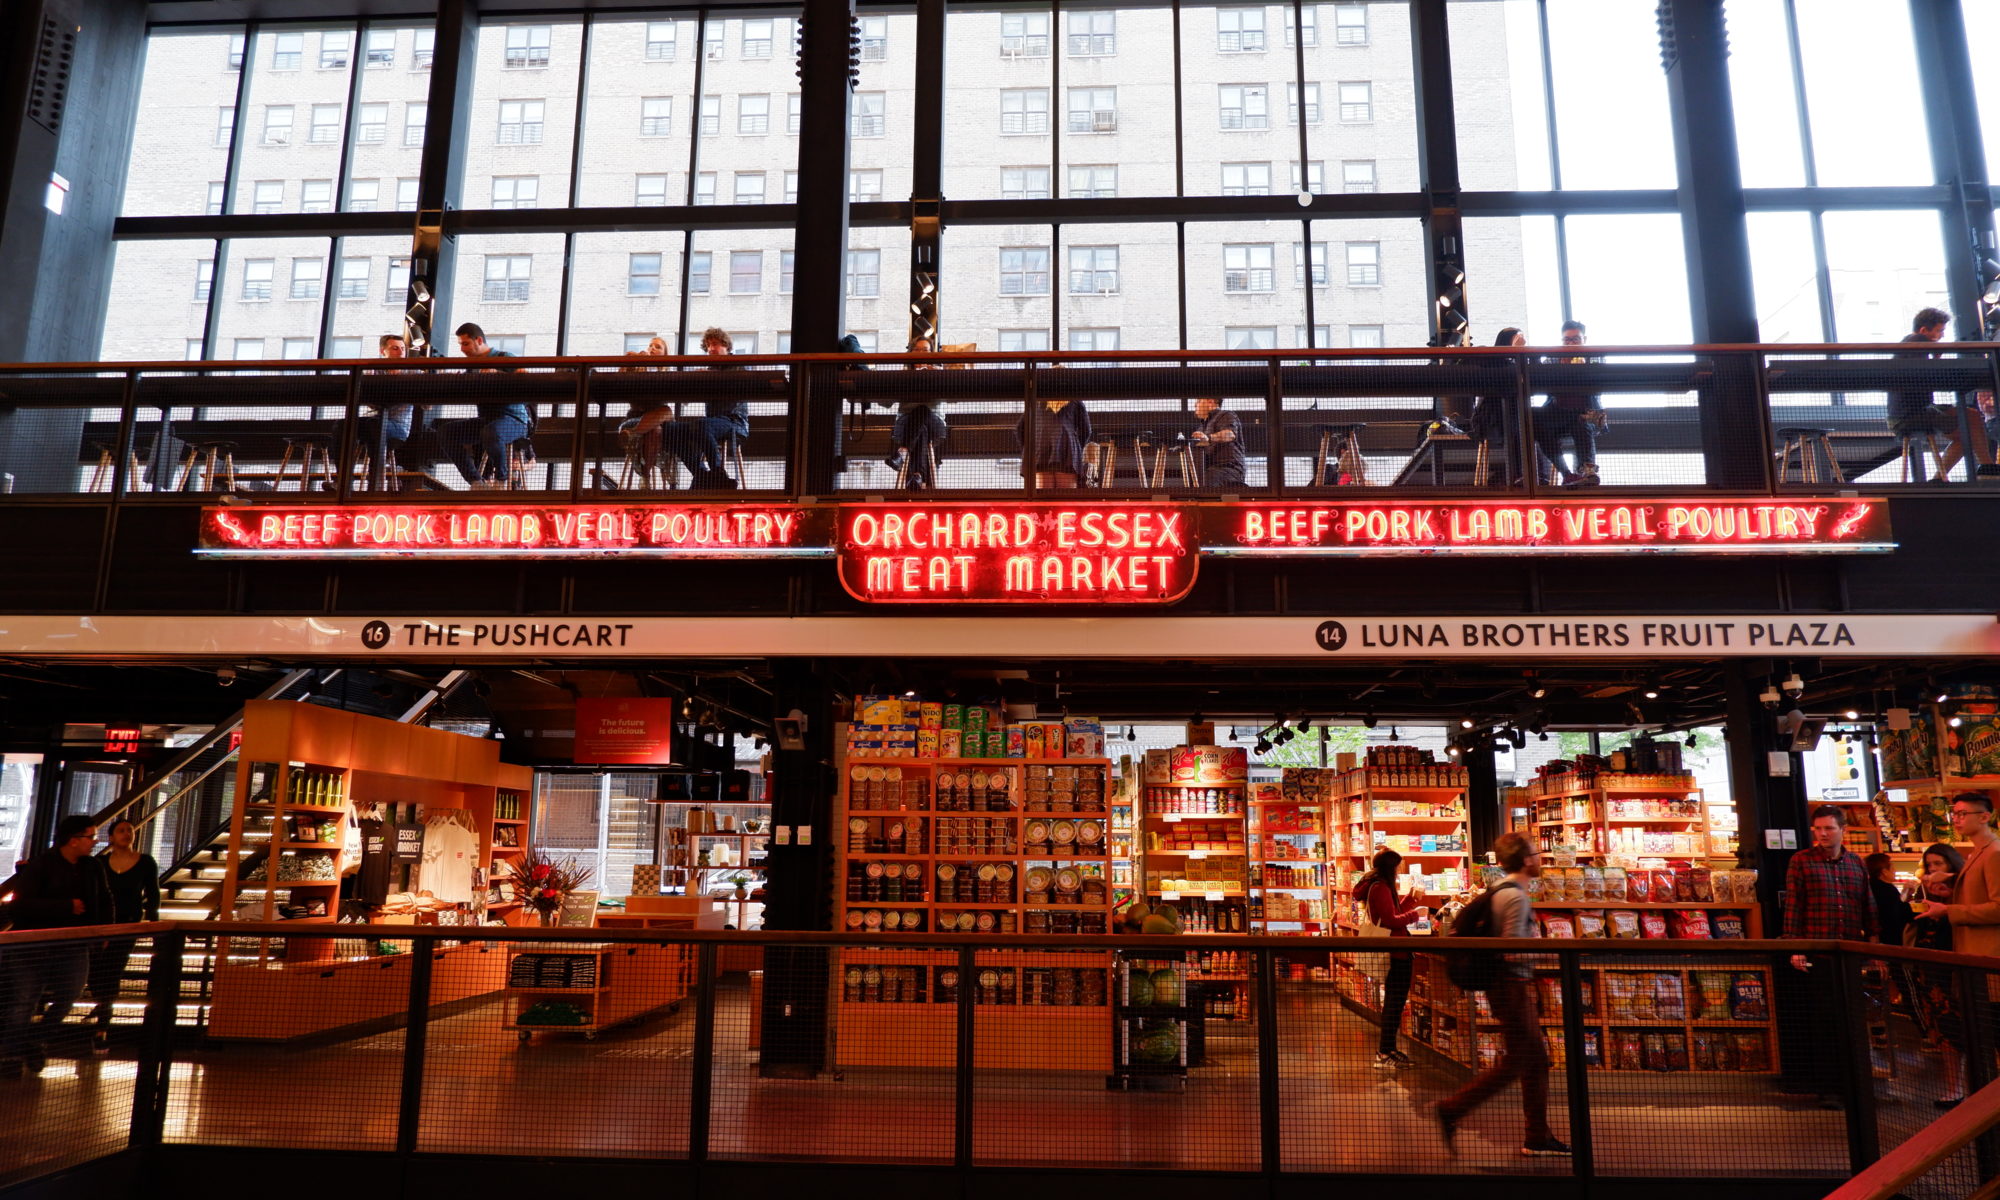 The first and second floors of the Essex Market with a historic neon sign from the Orchard Essex Meat Market